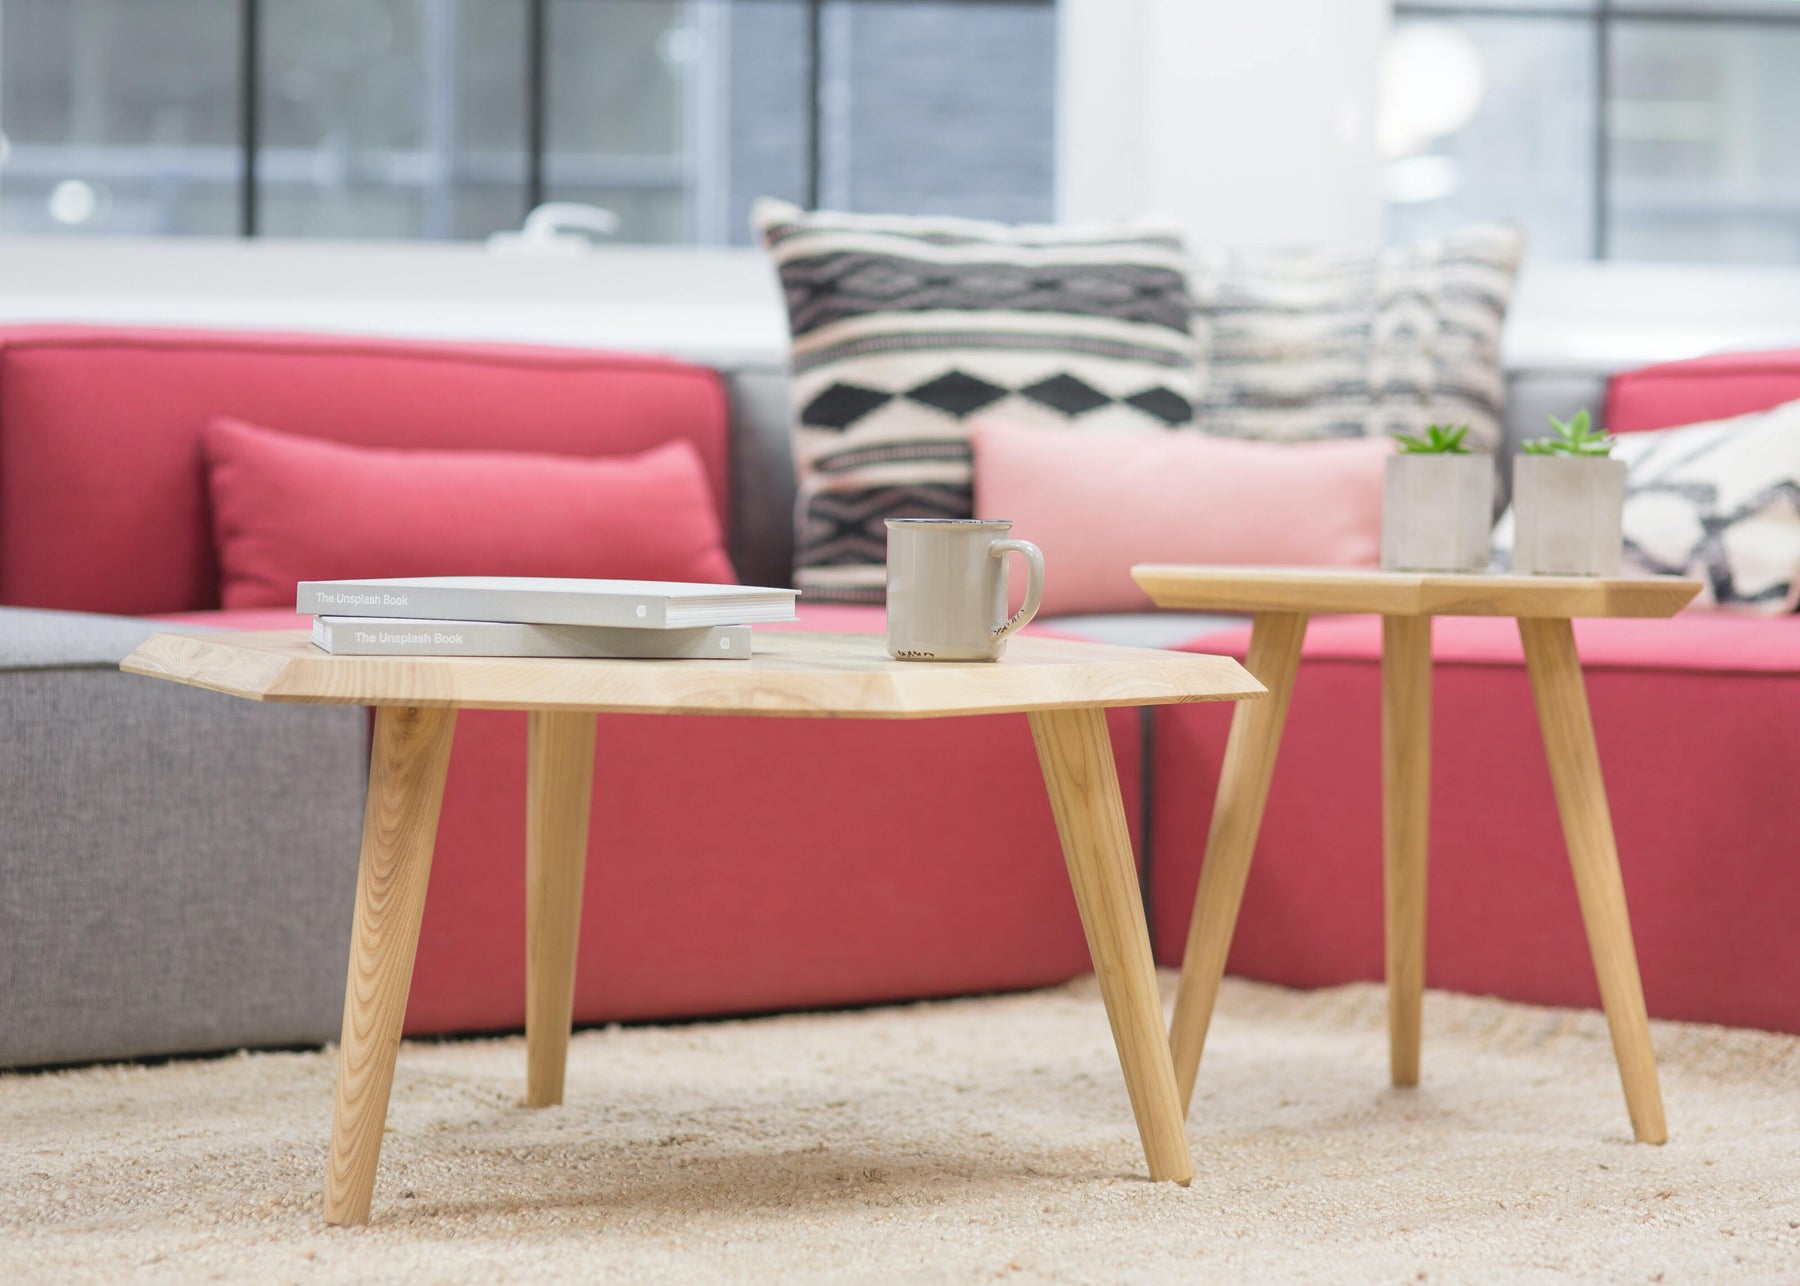 Nesting Tables Are The Unsung Heroes Of The Home: Here's 5 Ways To Use Them